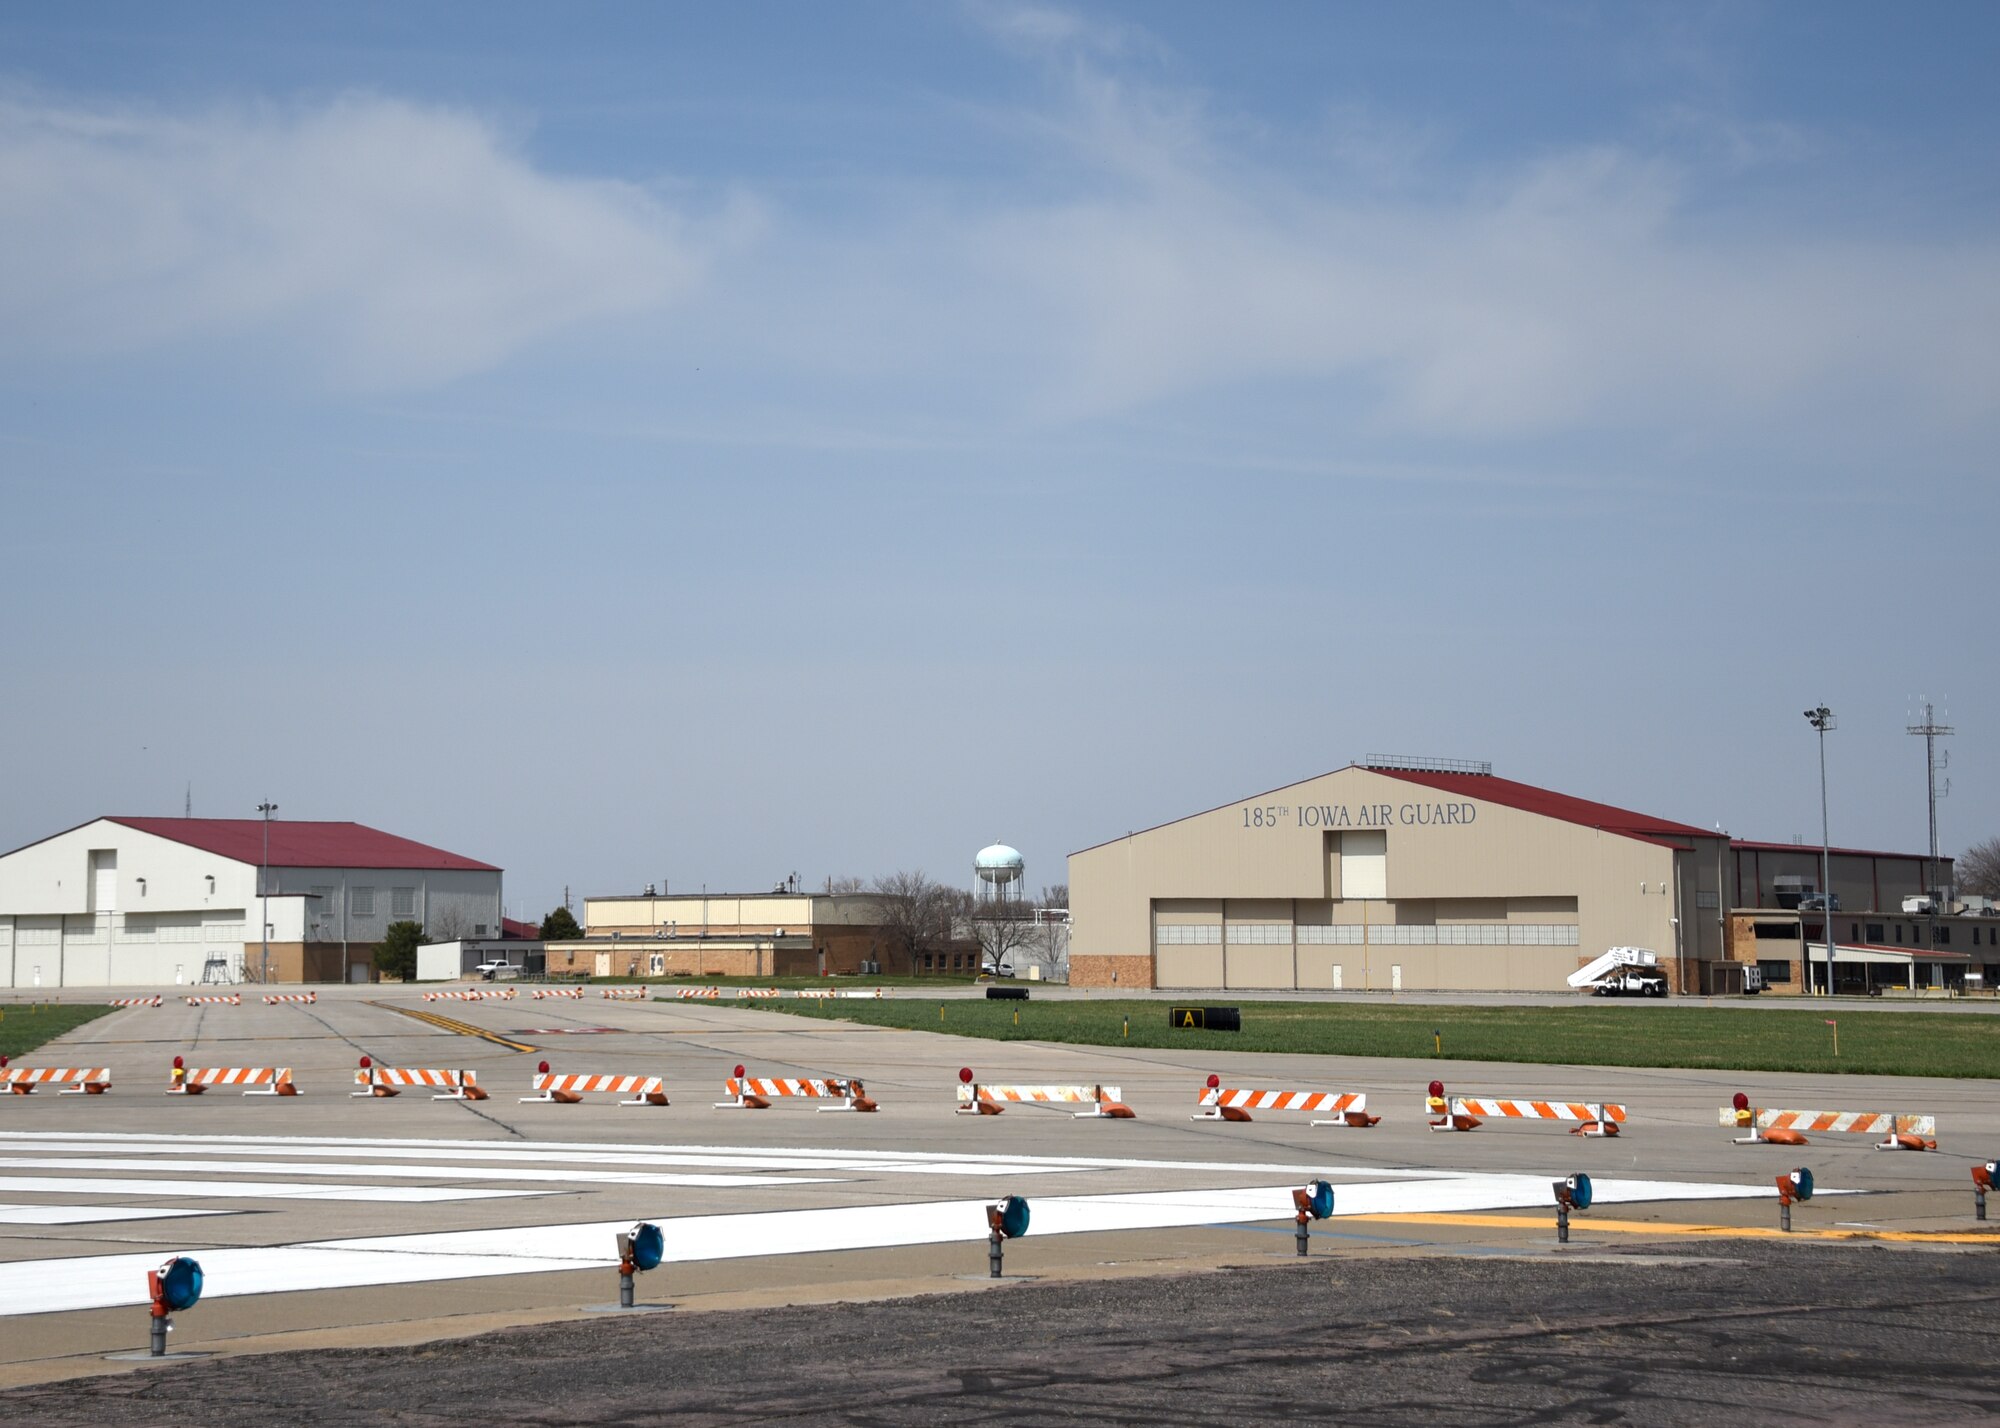 The flight line sits empty as construction begins on runway 13-31 at the Sioux Gateway Airport in Sioux City, Iowa April 26, 2022.